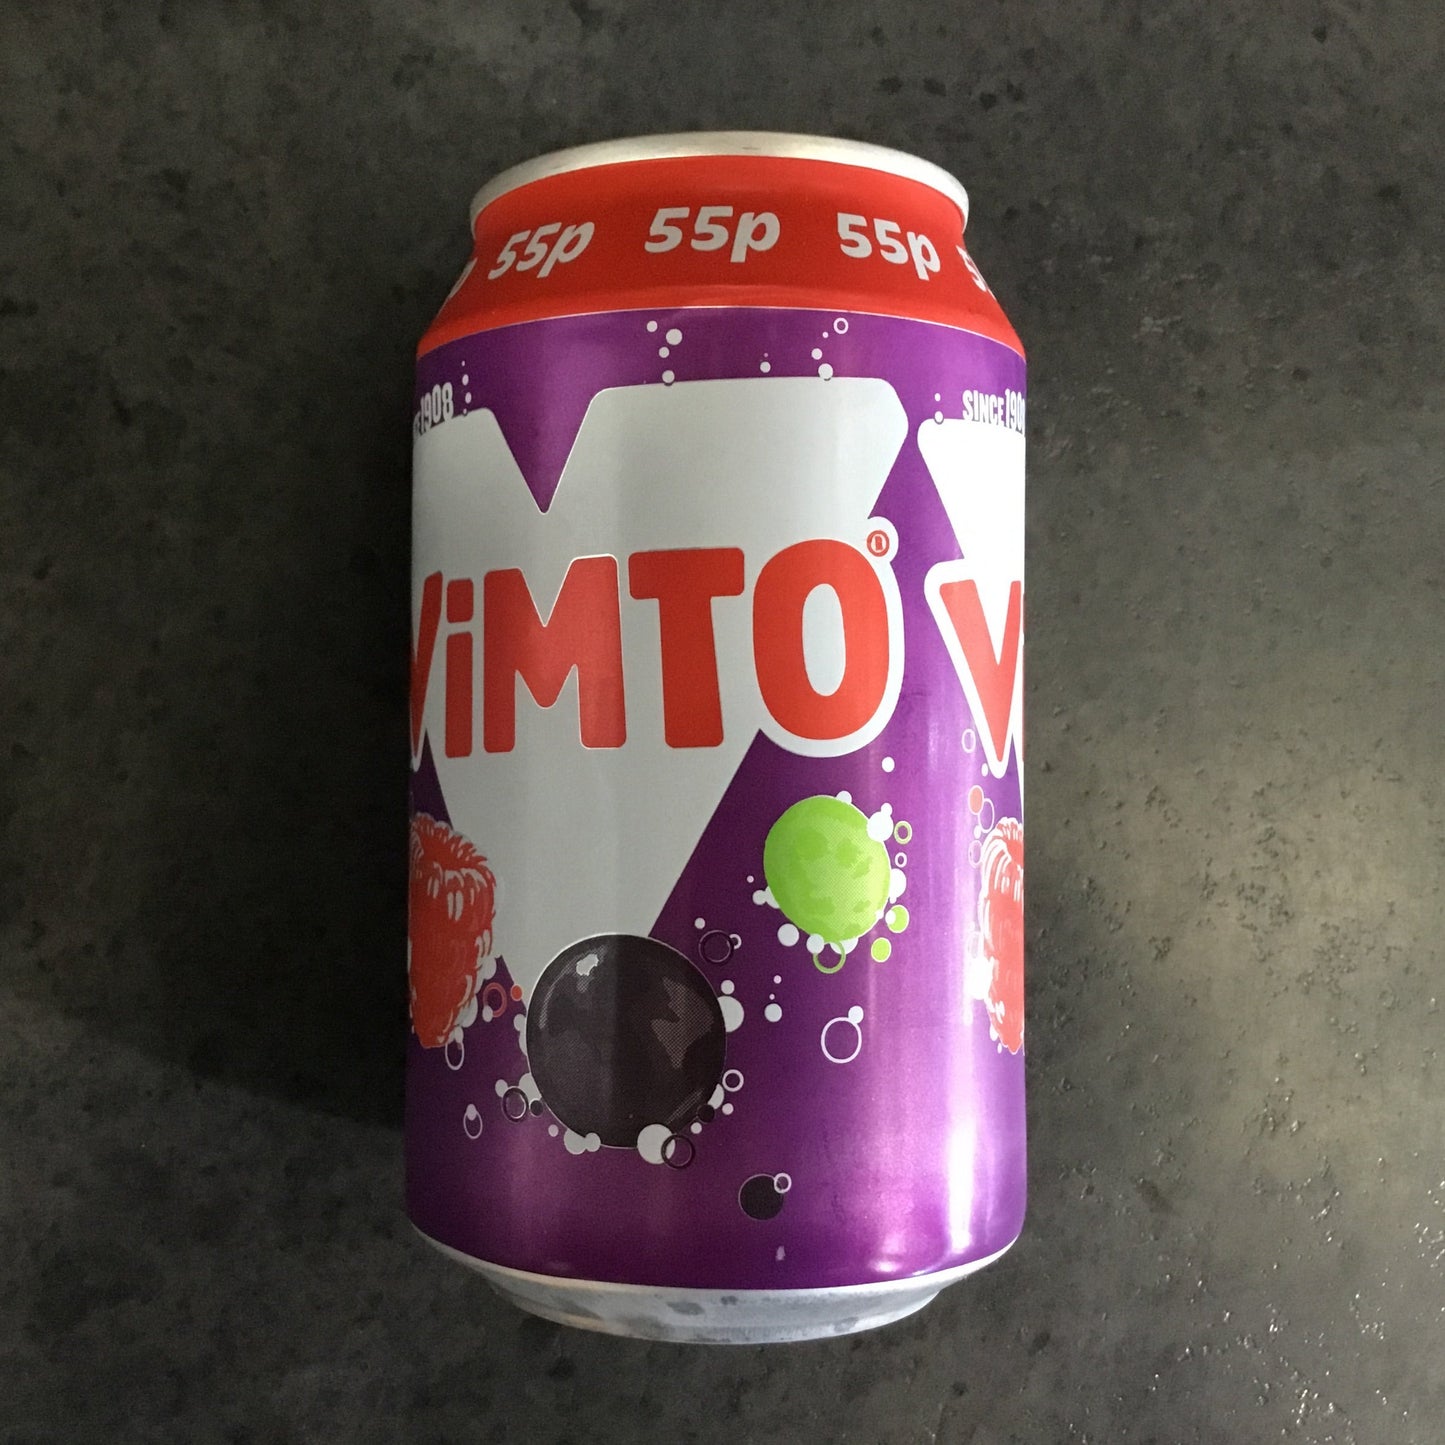 Vimto Fizzy 330ml UK can